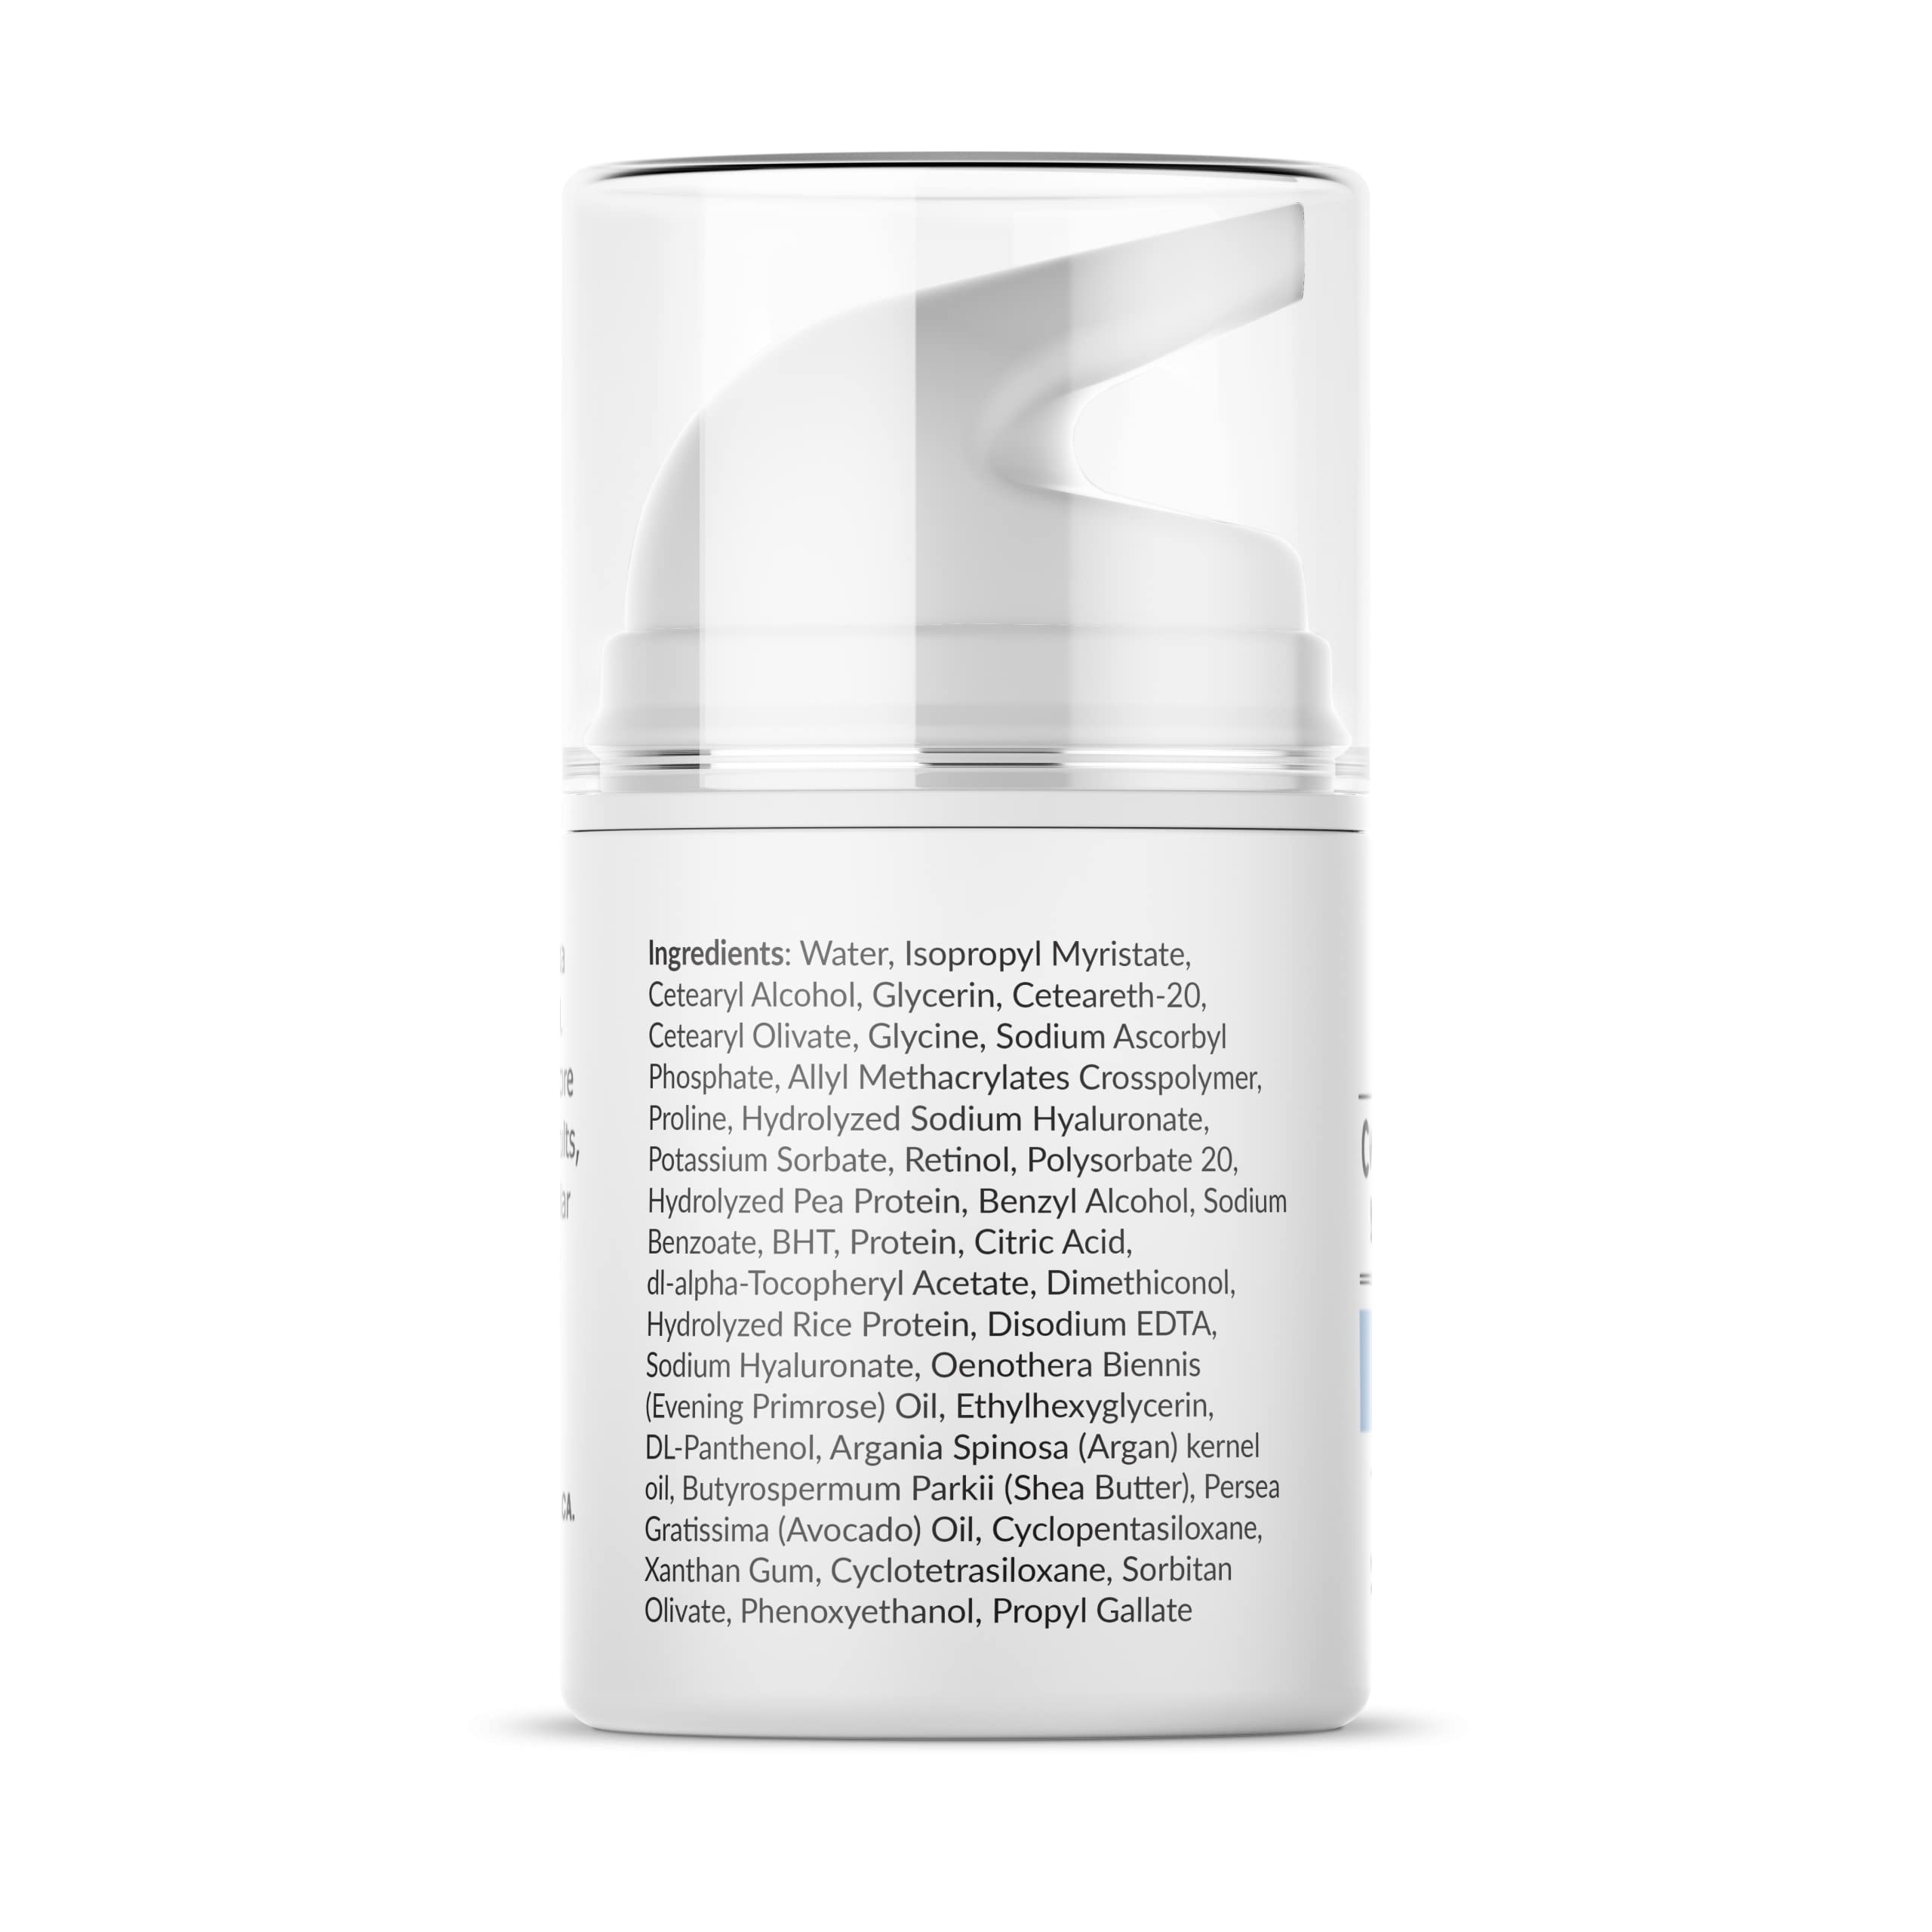 Retinol + Complete Anti-Aging Facial Moisturizer Cream with Hyaluronic Acid & Breakthrough Anti Wrinkle Complex - For Face and Eye Area 1.7 FL OZ